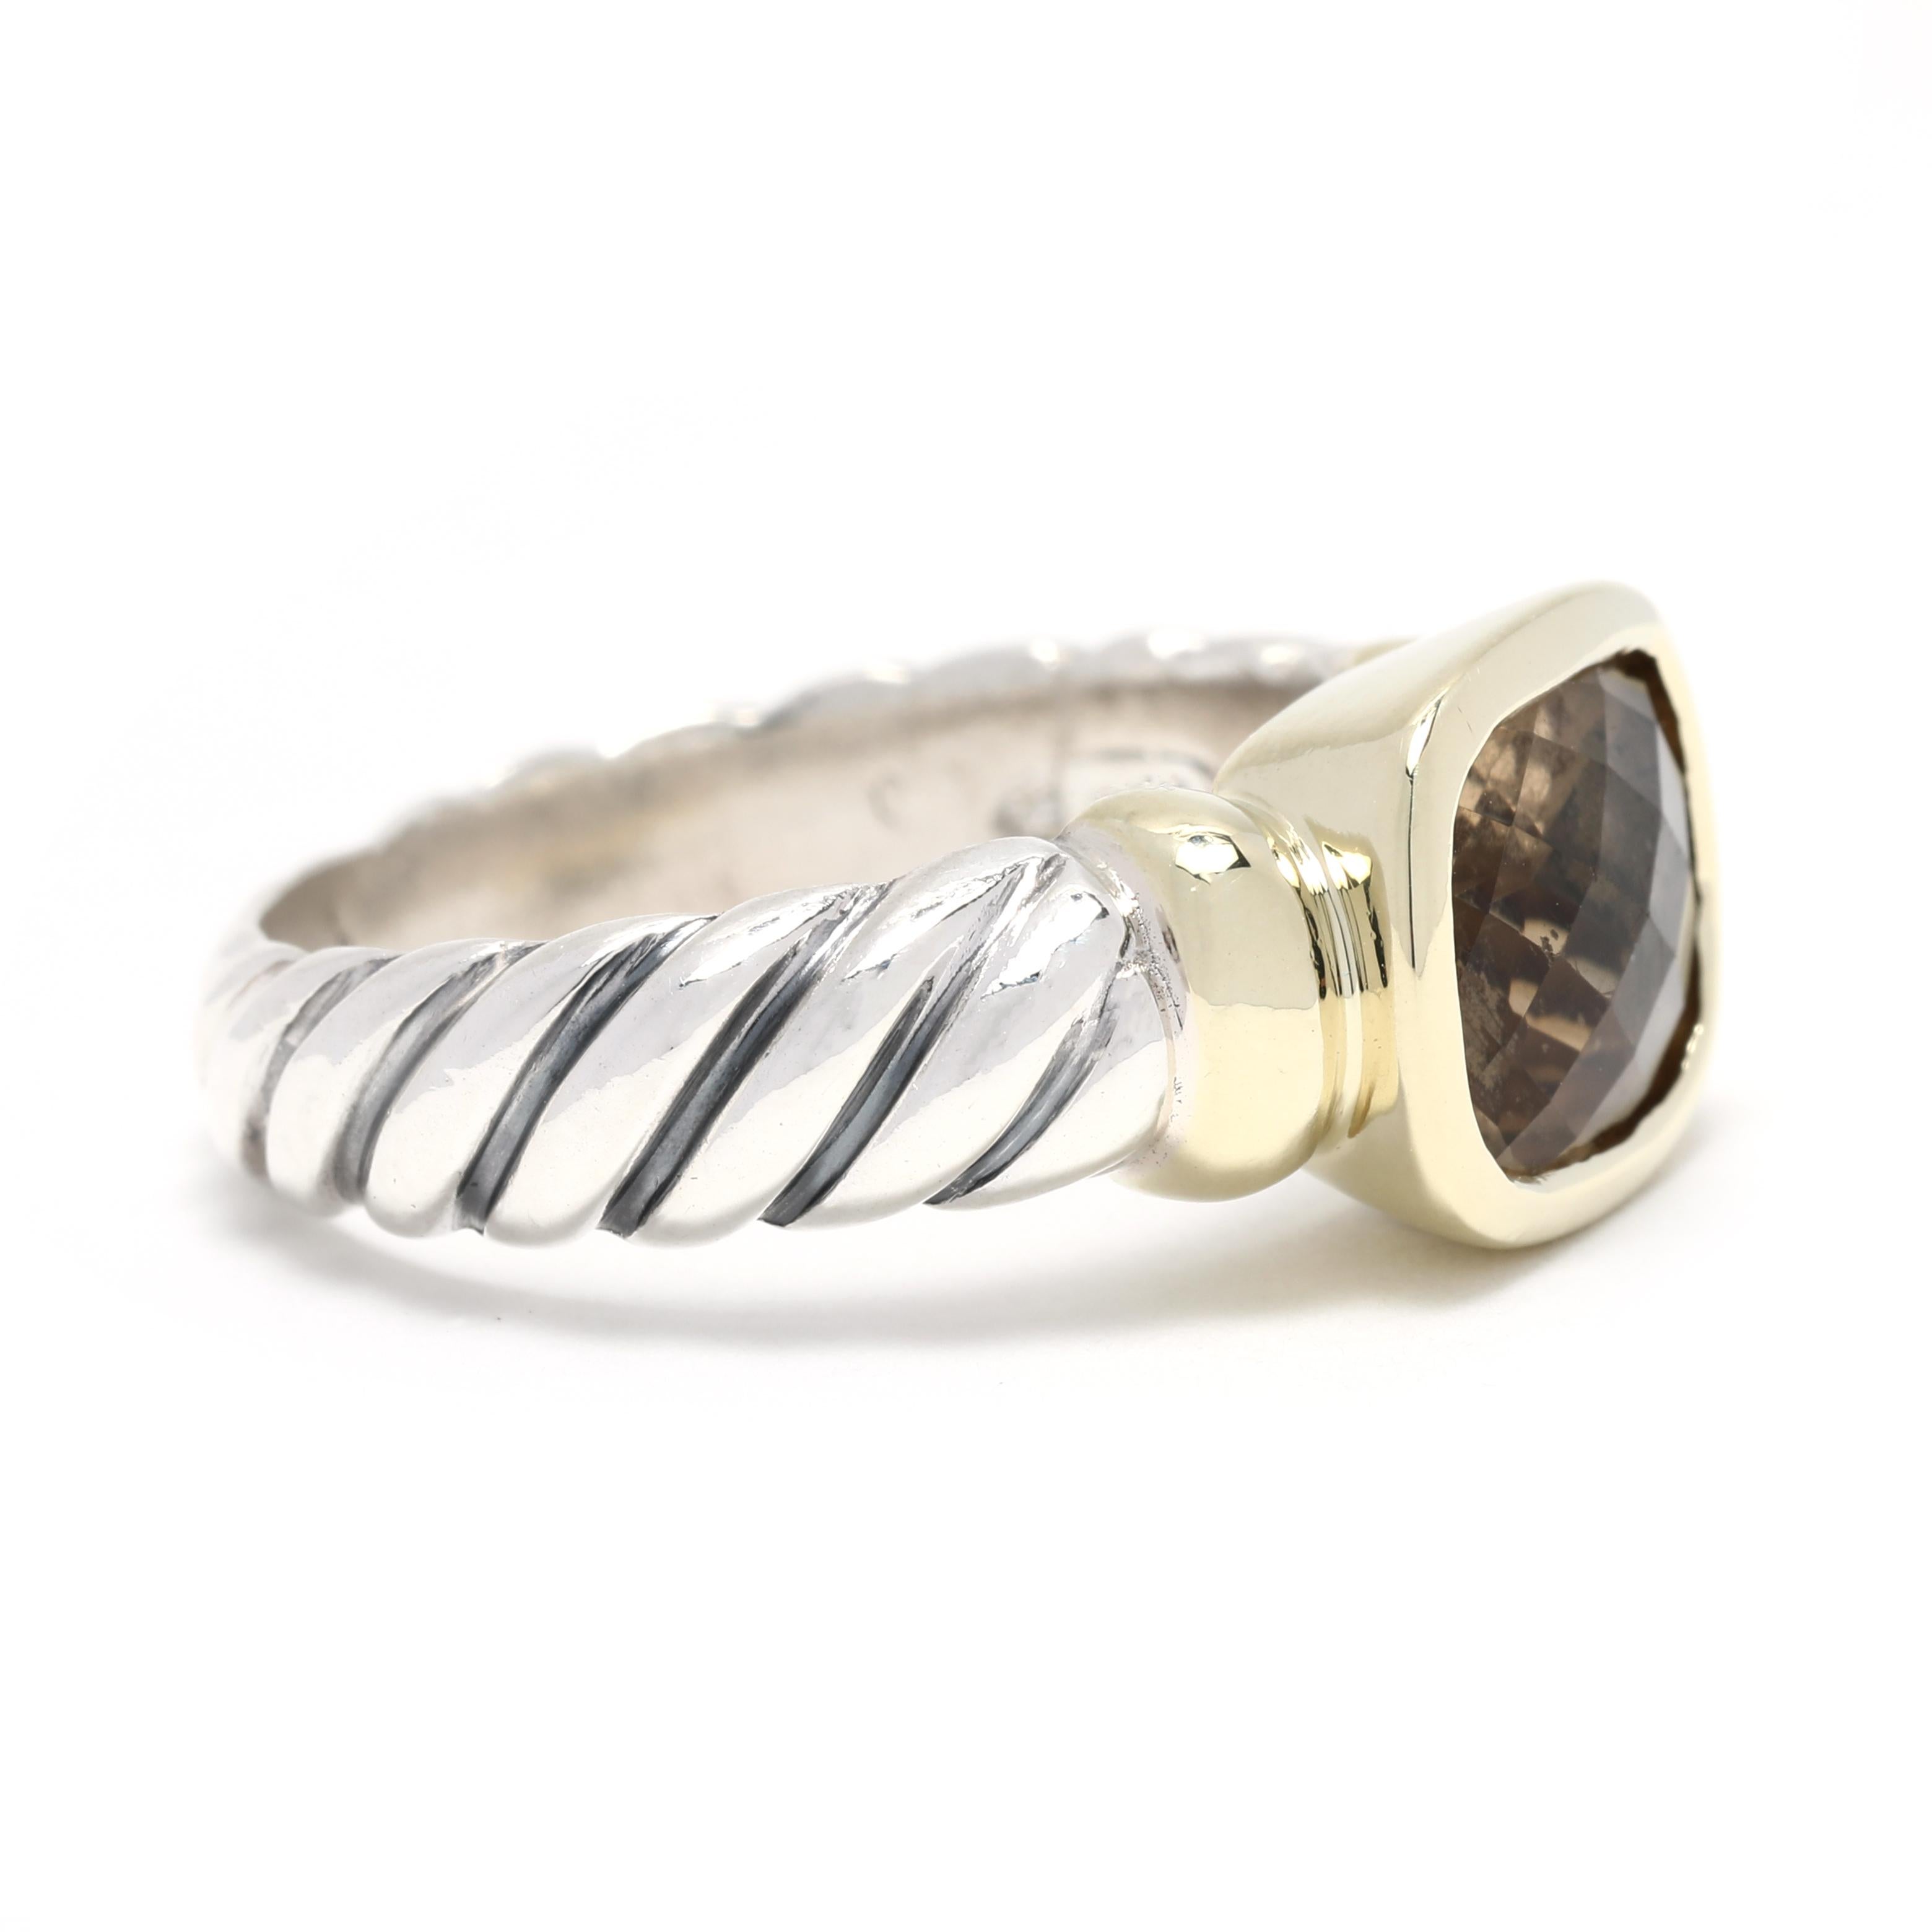 This exquisite David Yurman Noblesse Ring features a beautiful smoky quartz gemstone set in 14K yellow gold and sterling silver. With its delicate, sophisticated design, this statement ring will elevate any look. The ring size is 6.75, perfect for